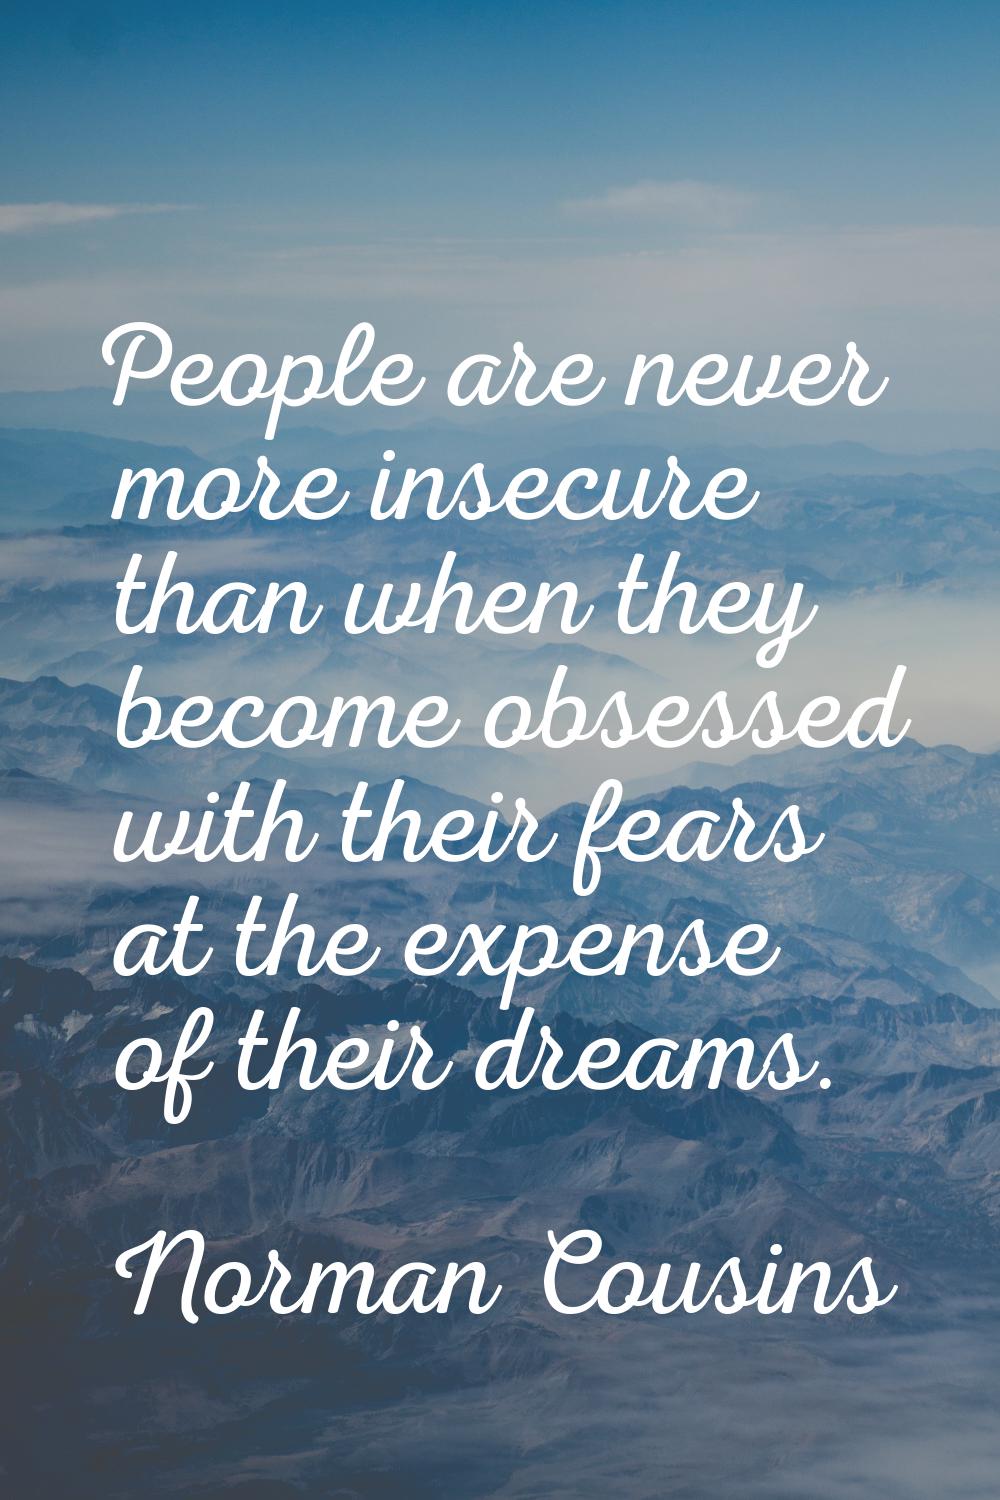 People are never more insecure than when they become obsessed with their fears at the expense of th